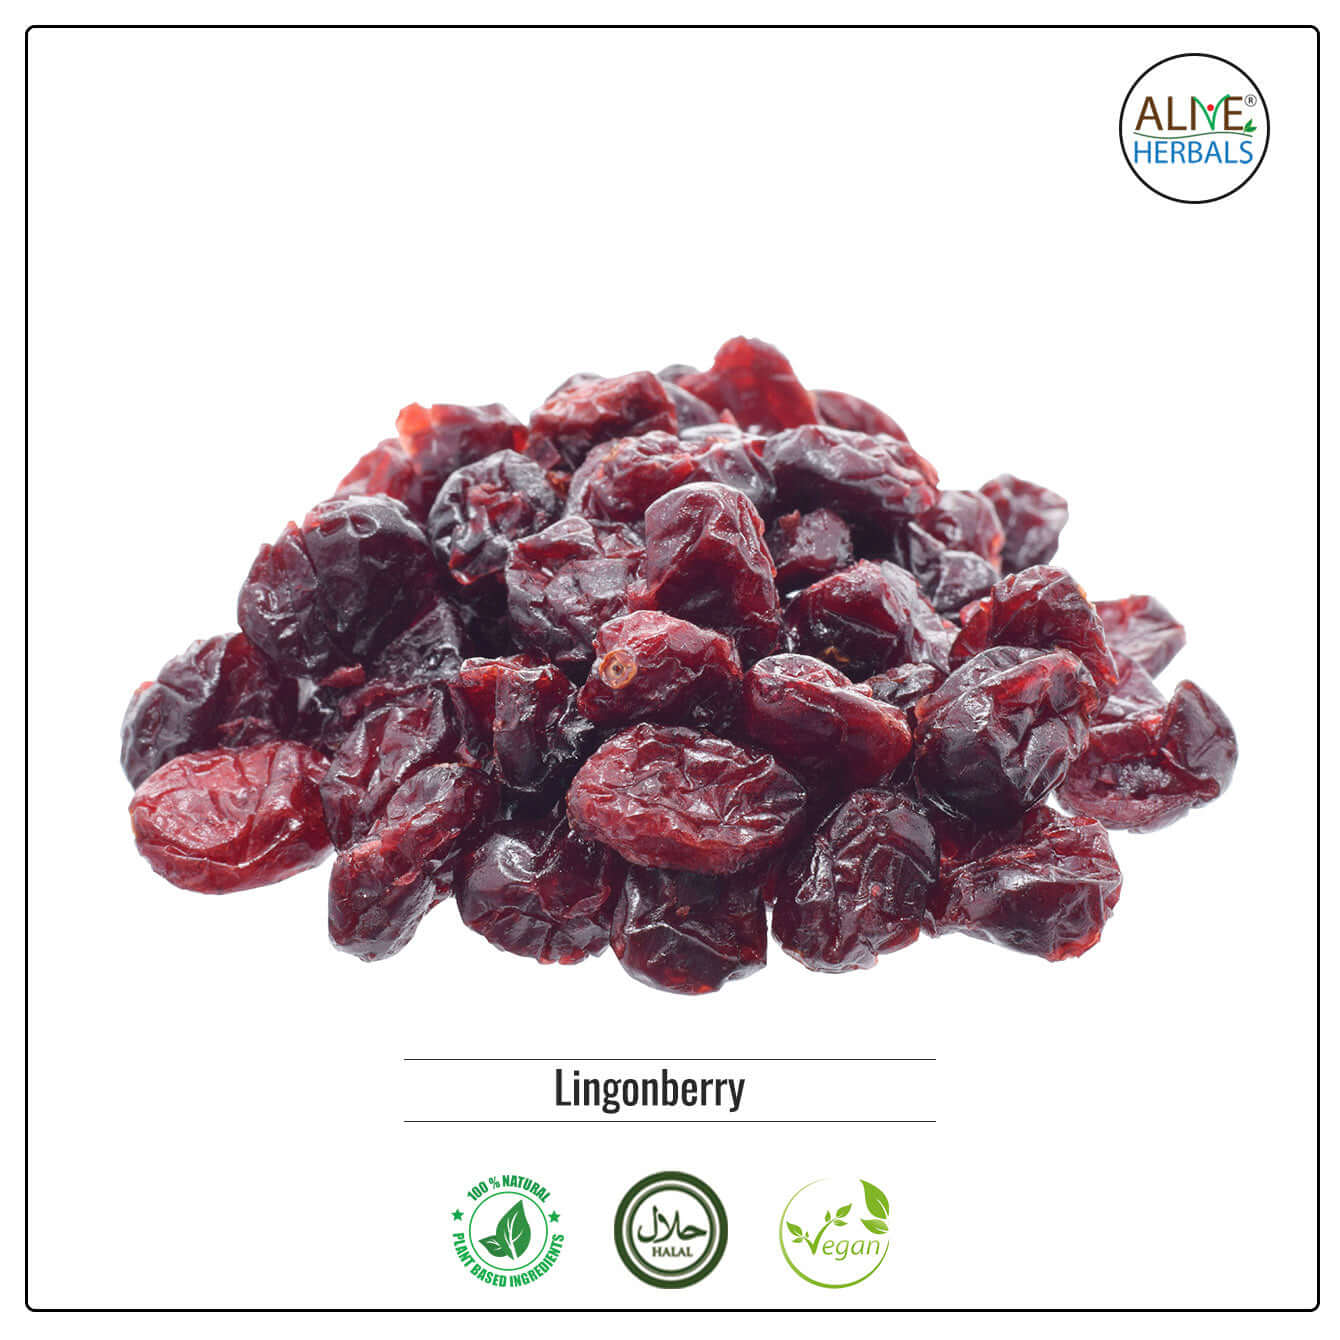 Lingonberry Dried - Buy at Natural Food Store | Alive Herbals.